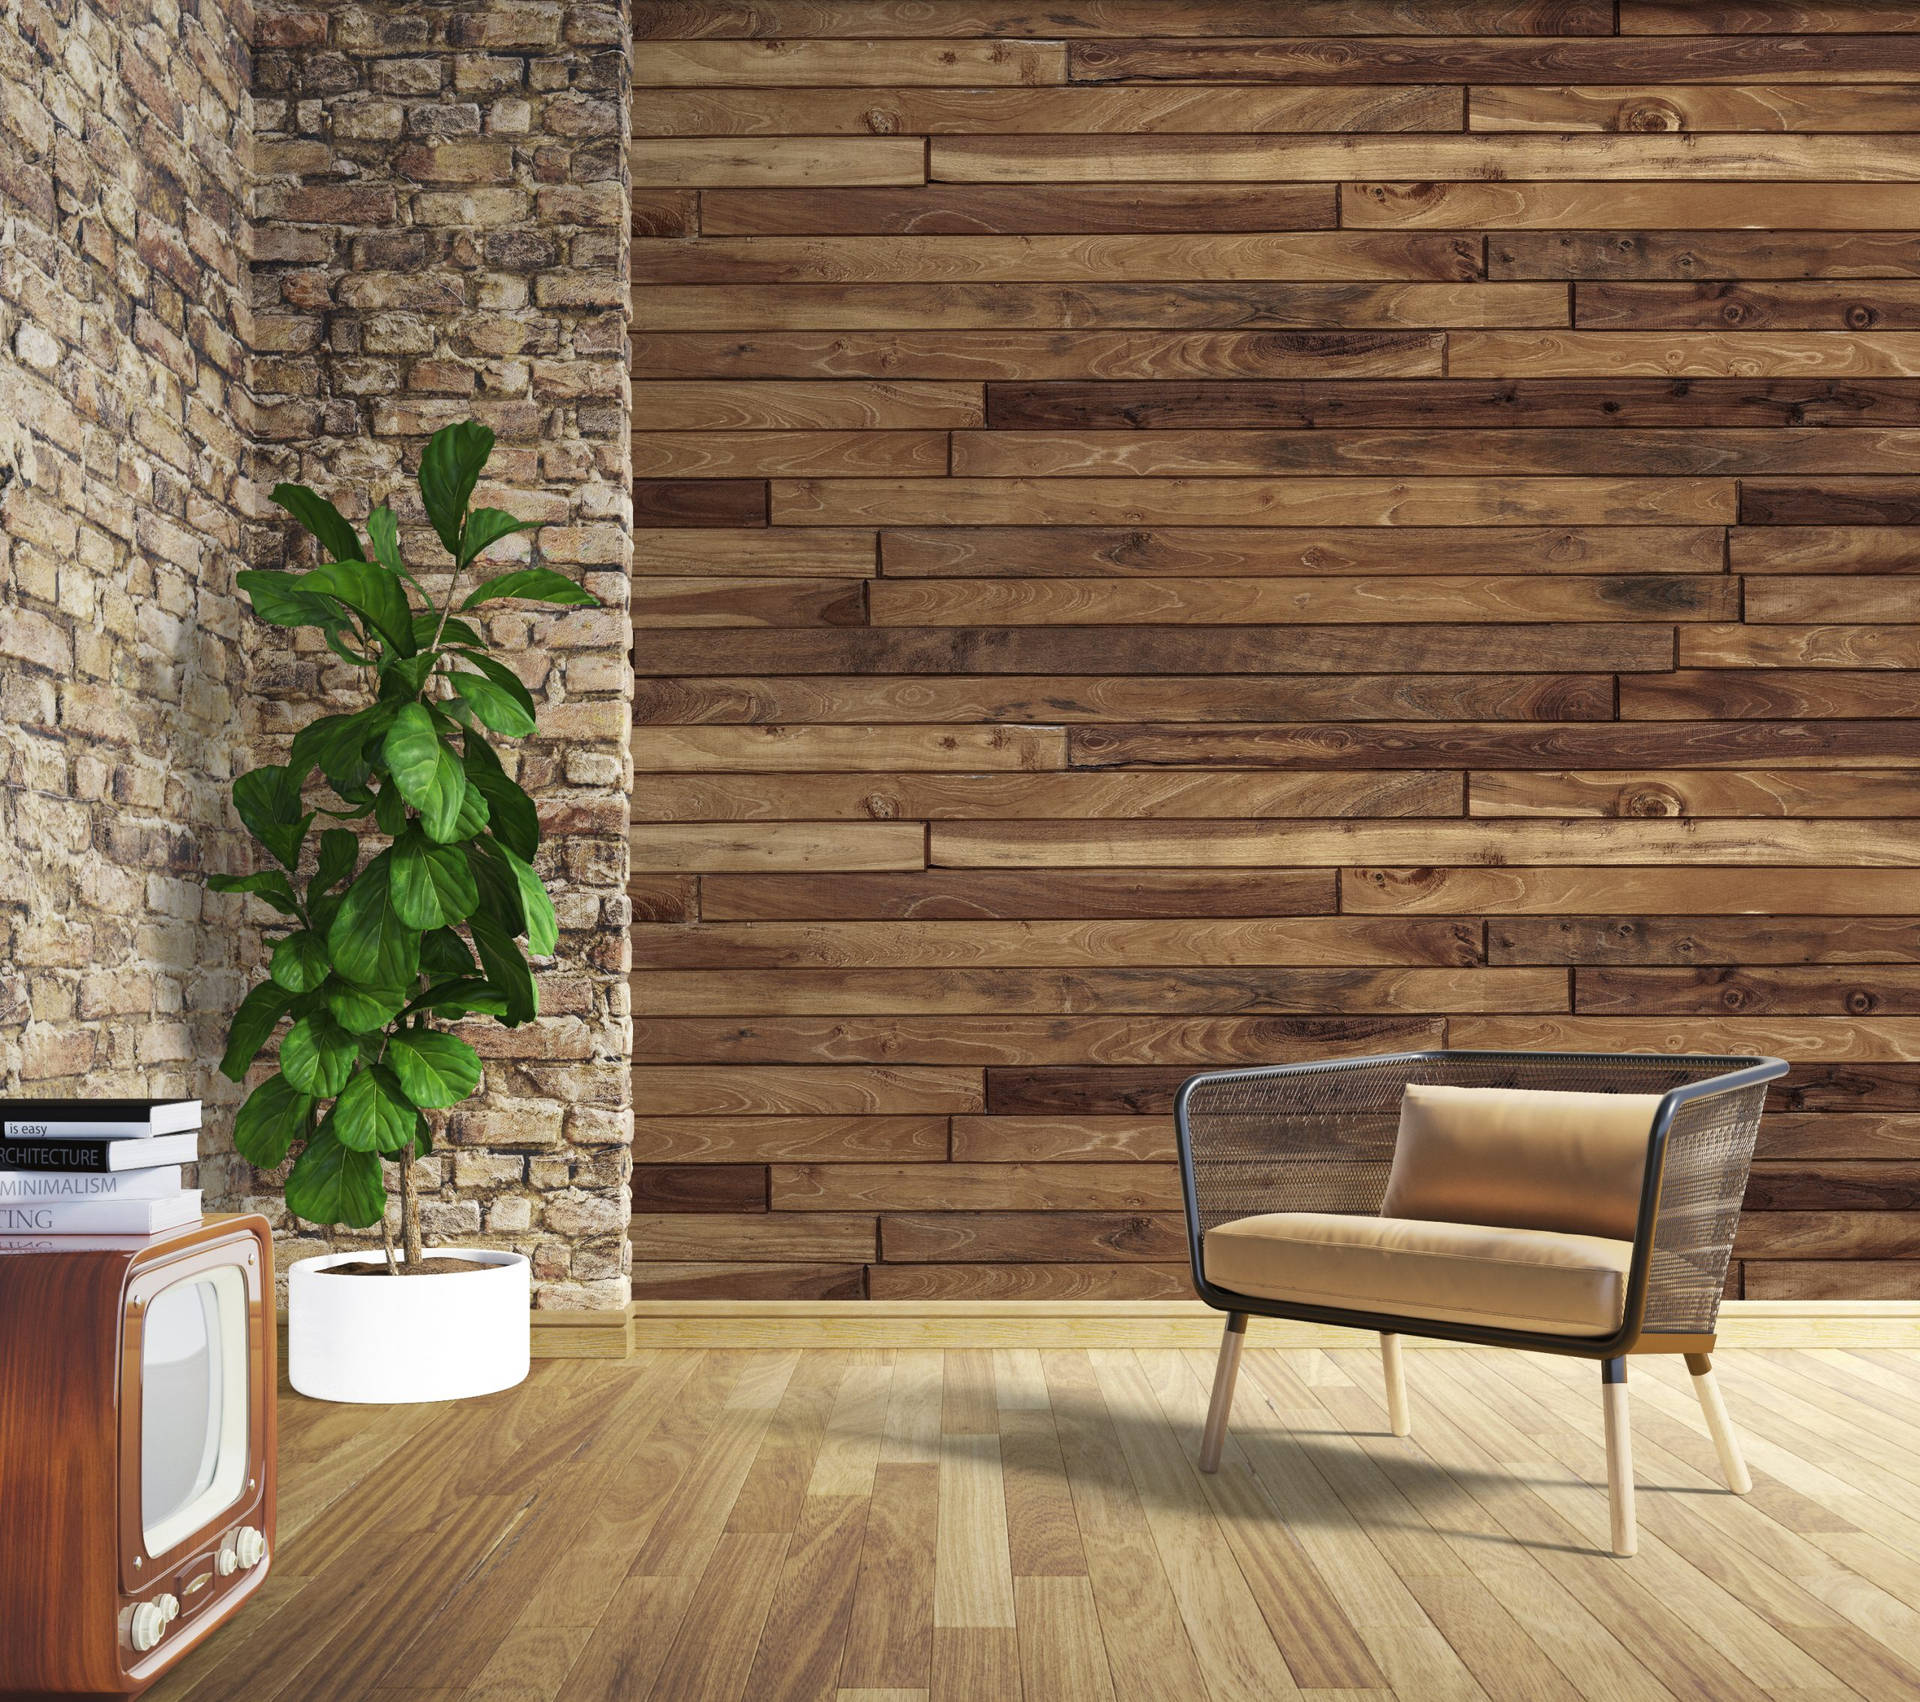 Caption: Modern Room Interior with Rustic Brick Texture and Wooden Accents Wallpaper